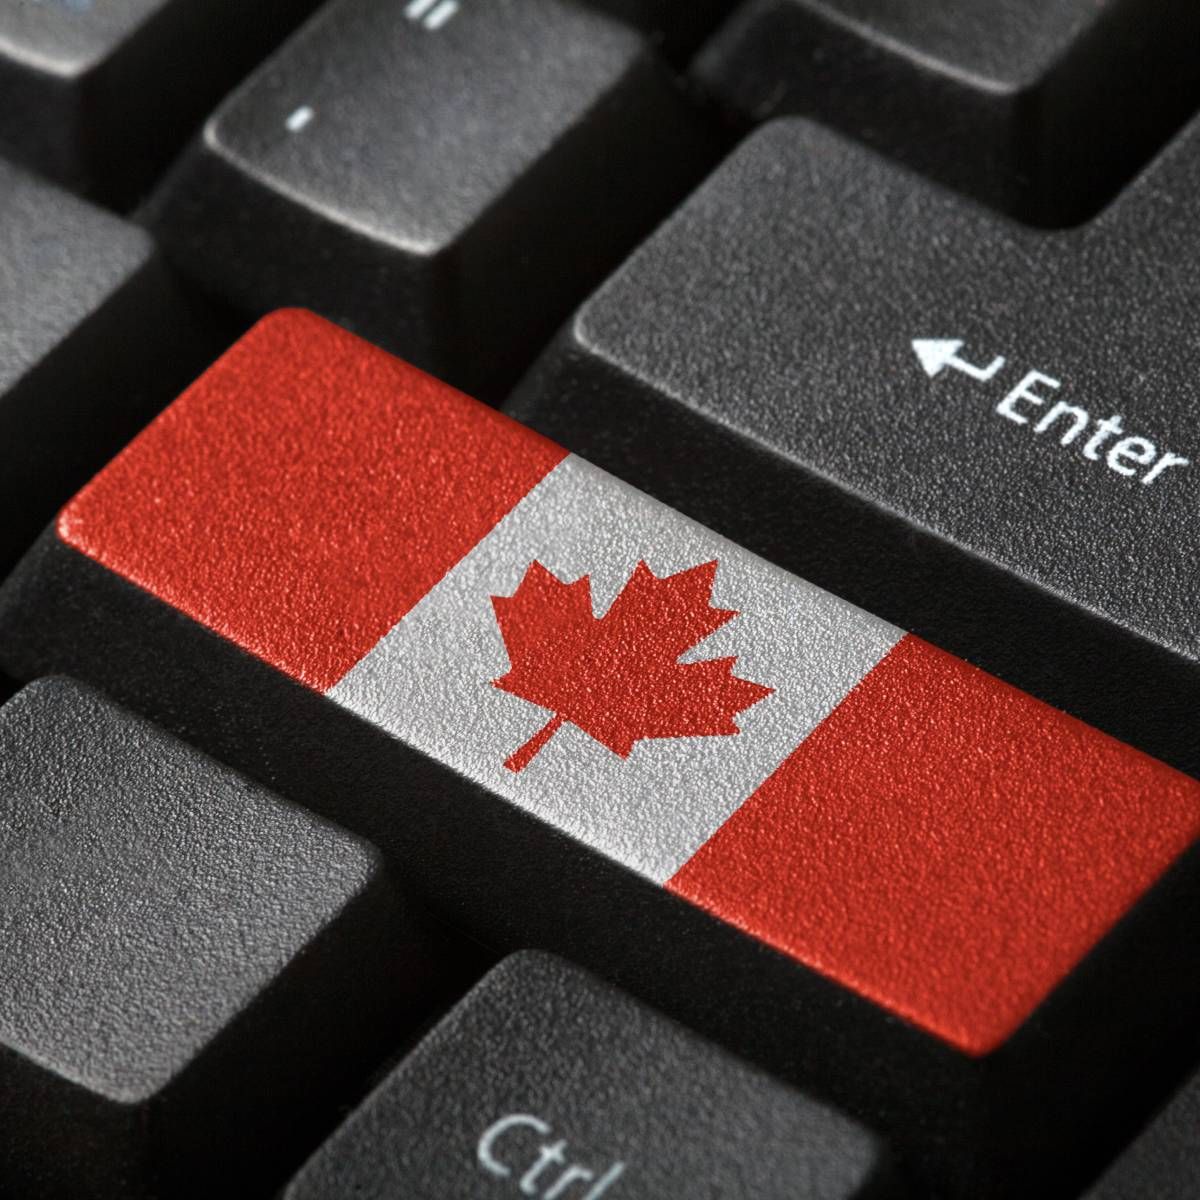 A computer keyboard with a button that has the Canadian flag.